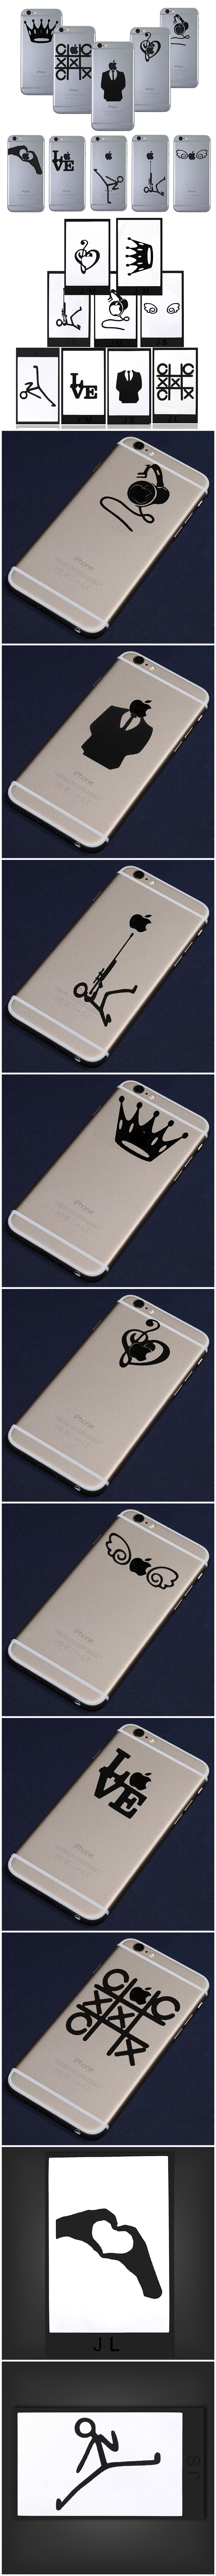 Creative Decal Vinyl Skin Cover Sticker For iPhone 4 4S 5 5S 5C 6 6S Plus